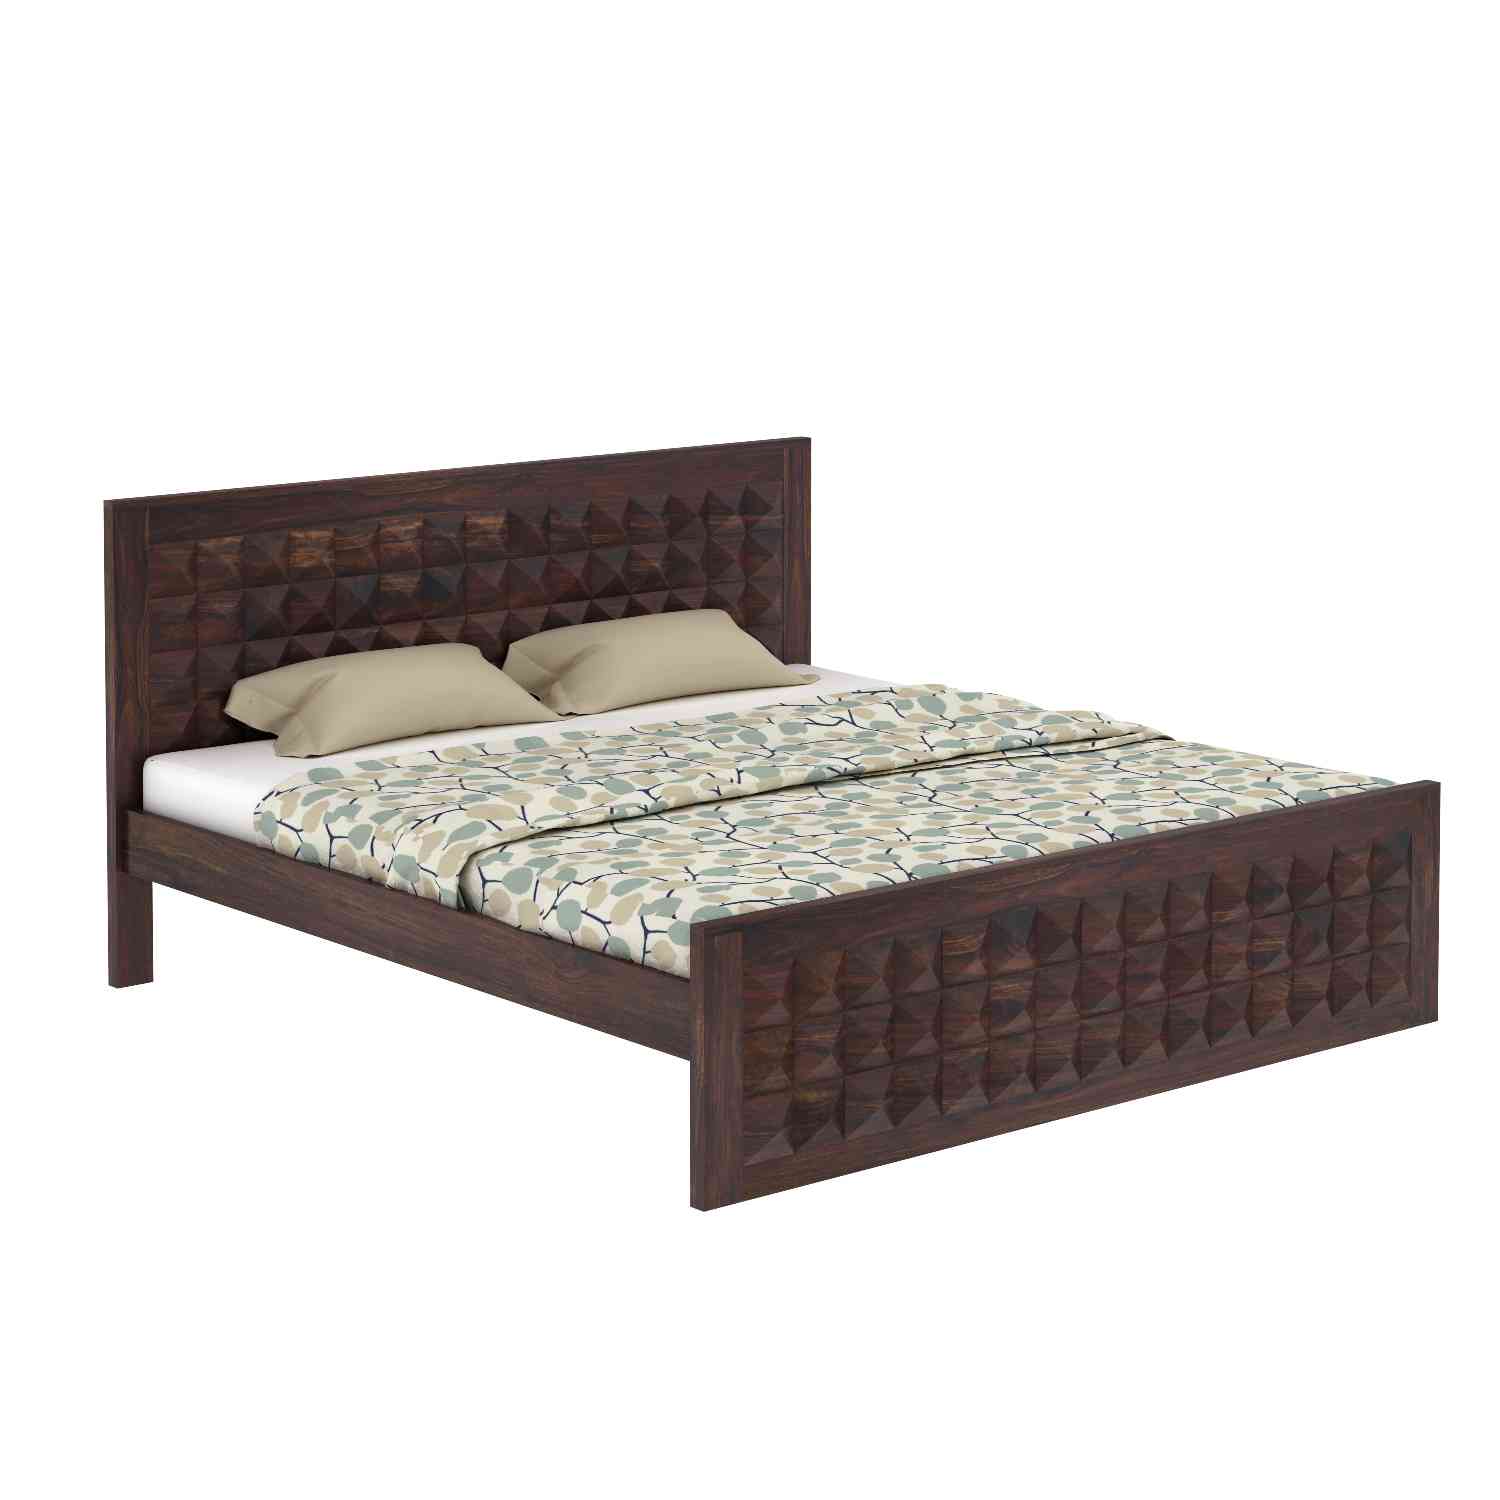 Sofia Solid Sheesham Wood Bed Without Storage (Queen Size, Walnut Finish)